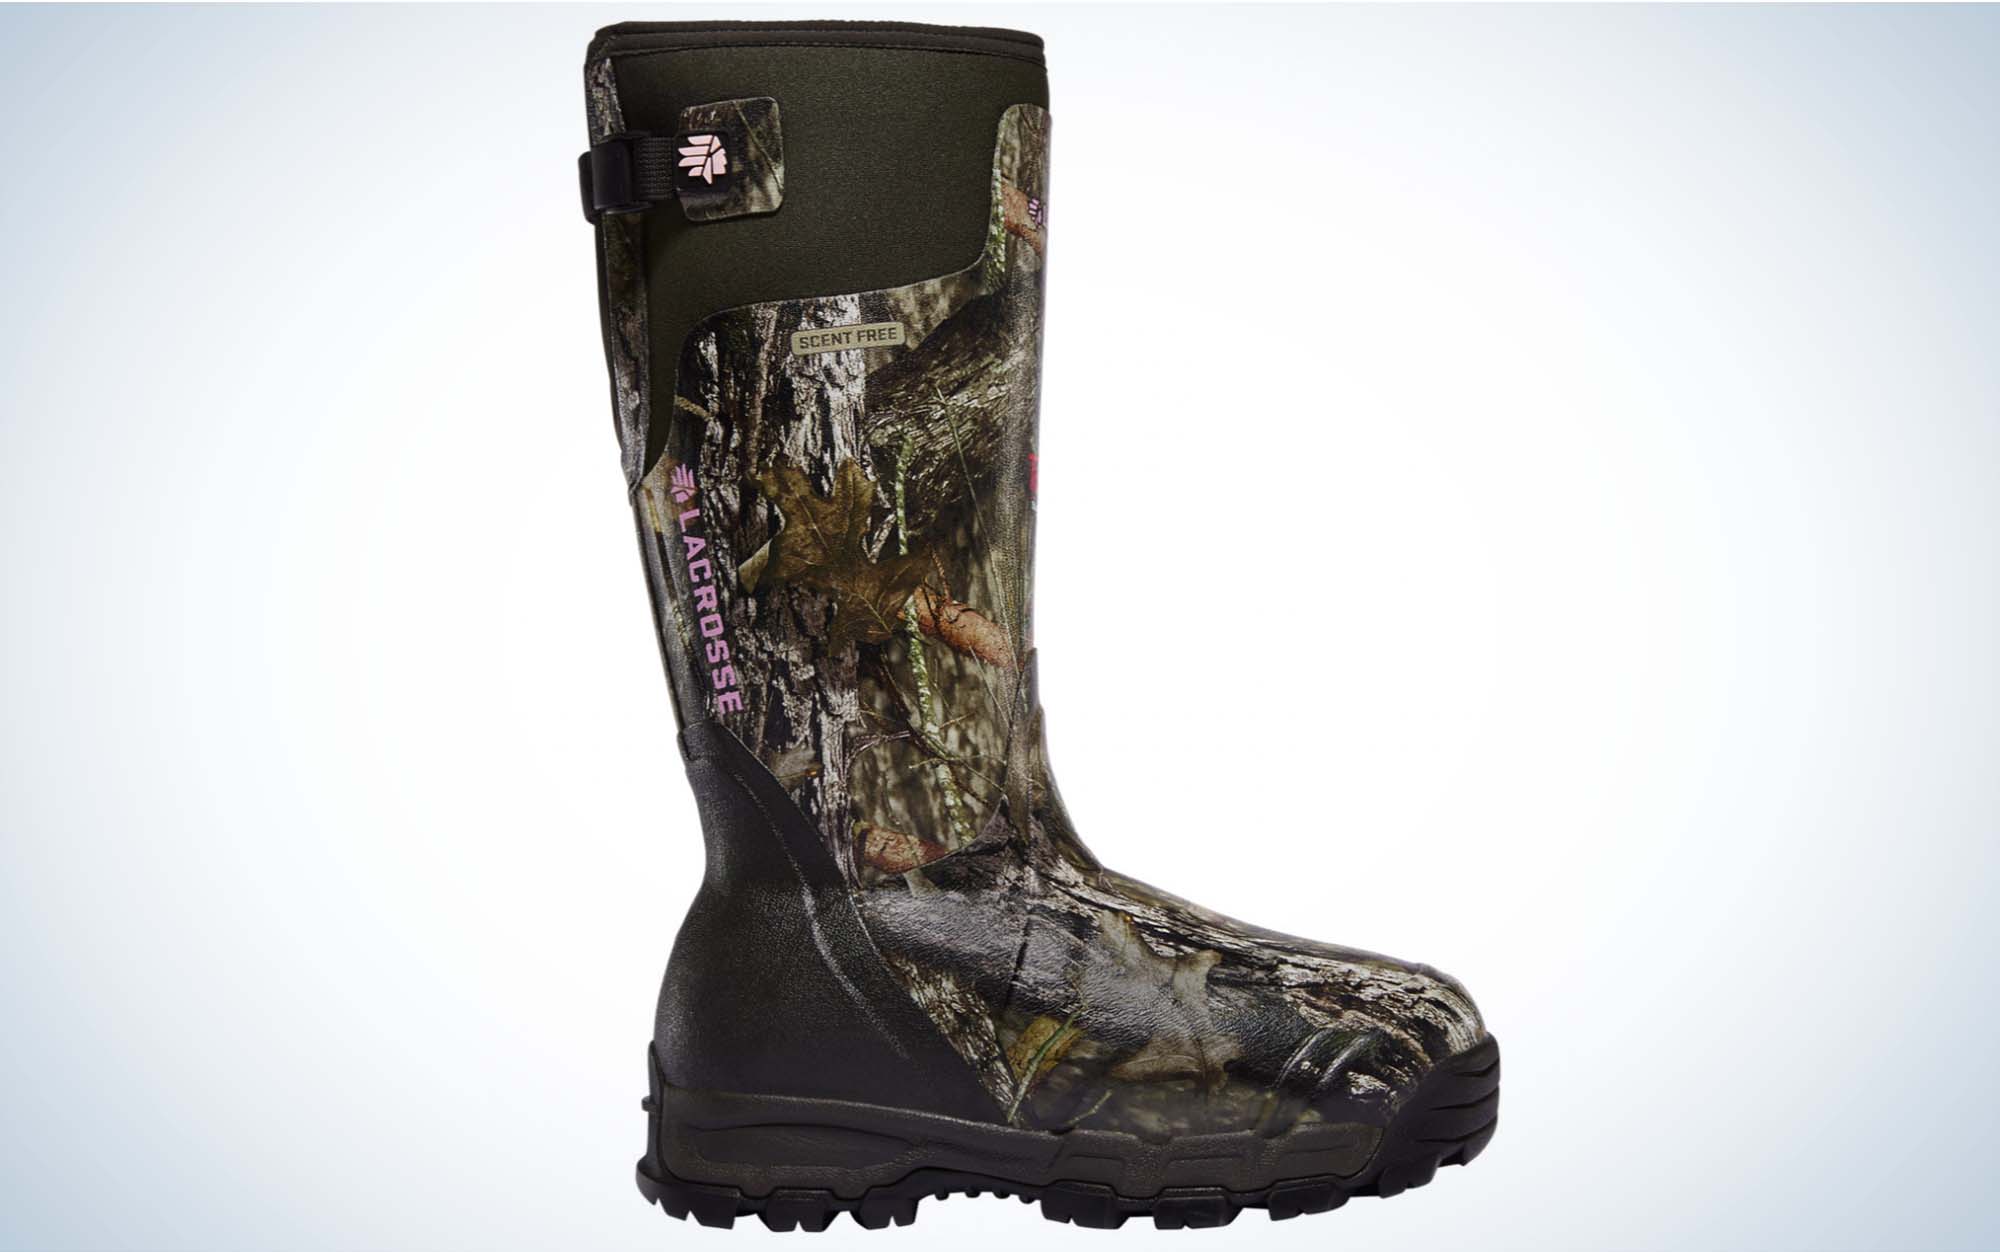 The LaCrosse Alphaburly Pro boots are the best ice fishing boot for women.